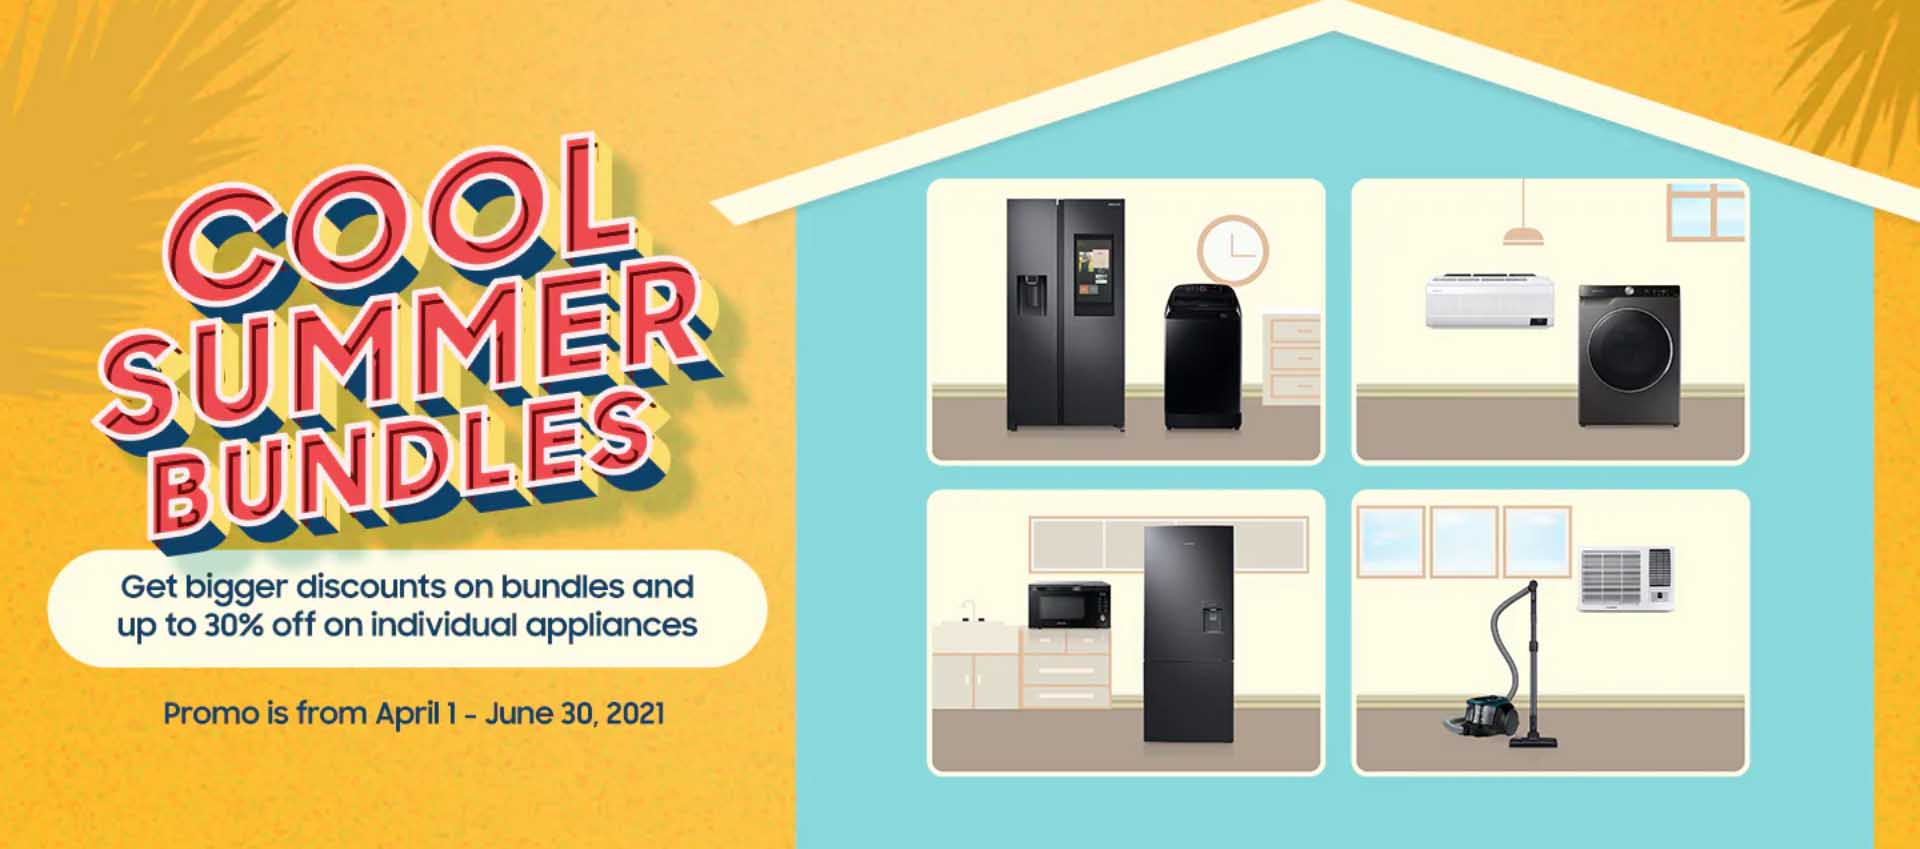 Last Call Promo! Get Amazing Home Appliance Deals  With Samsung’s Cool Summer Bundles